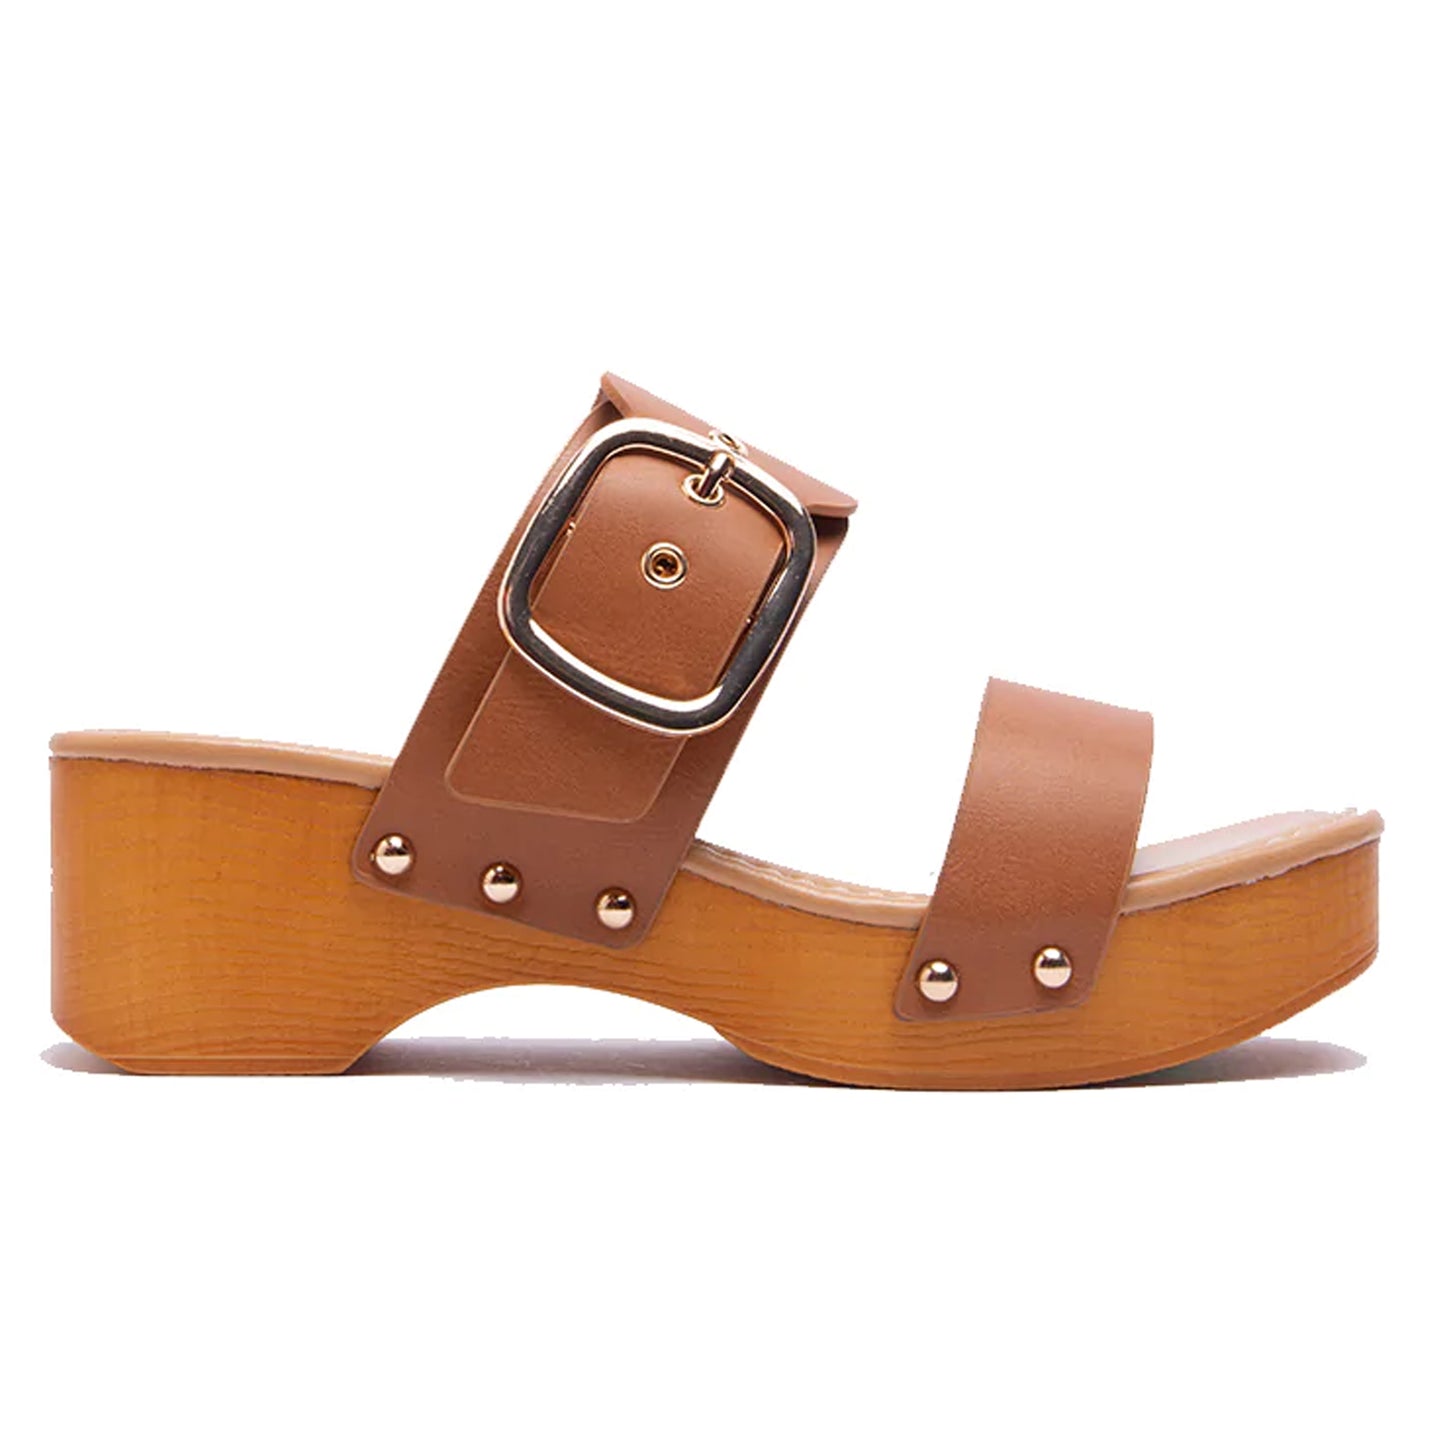 Double Adjustable Buckle Straps Slip On Wood Accents Sandals Tan